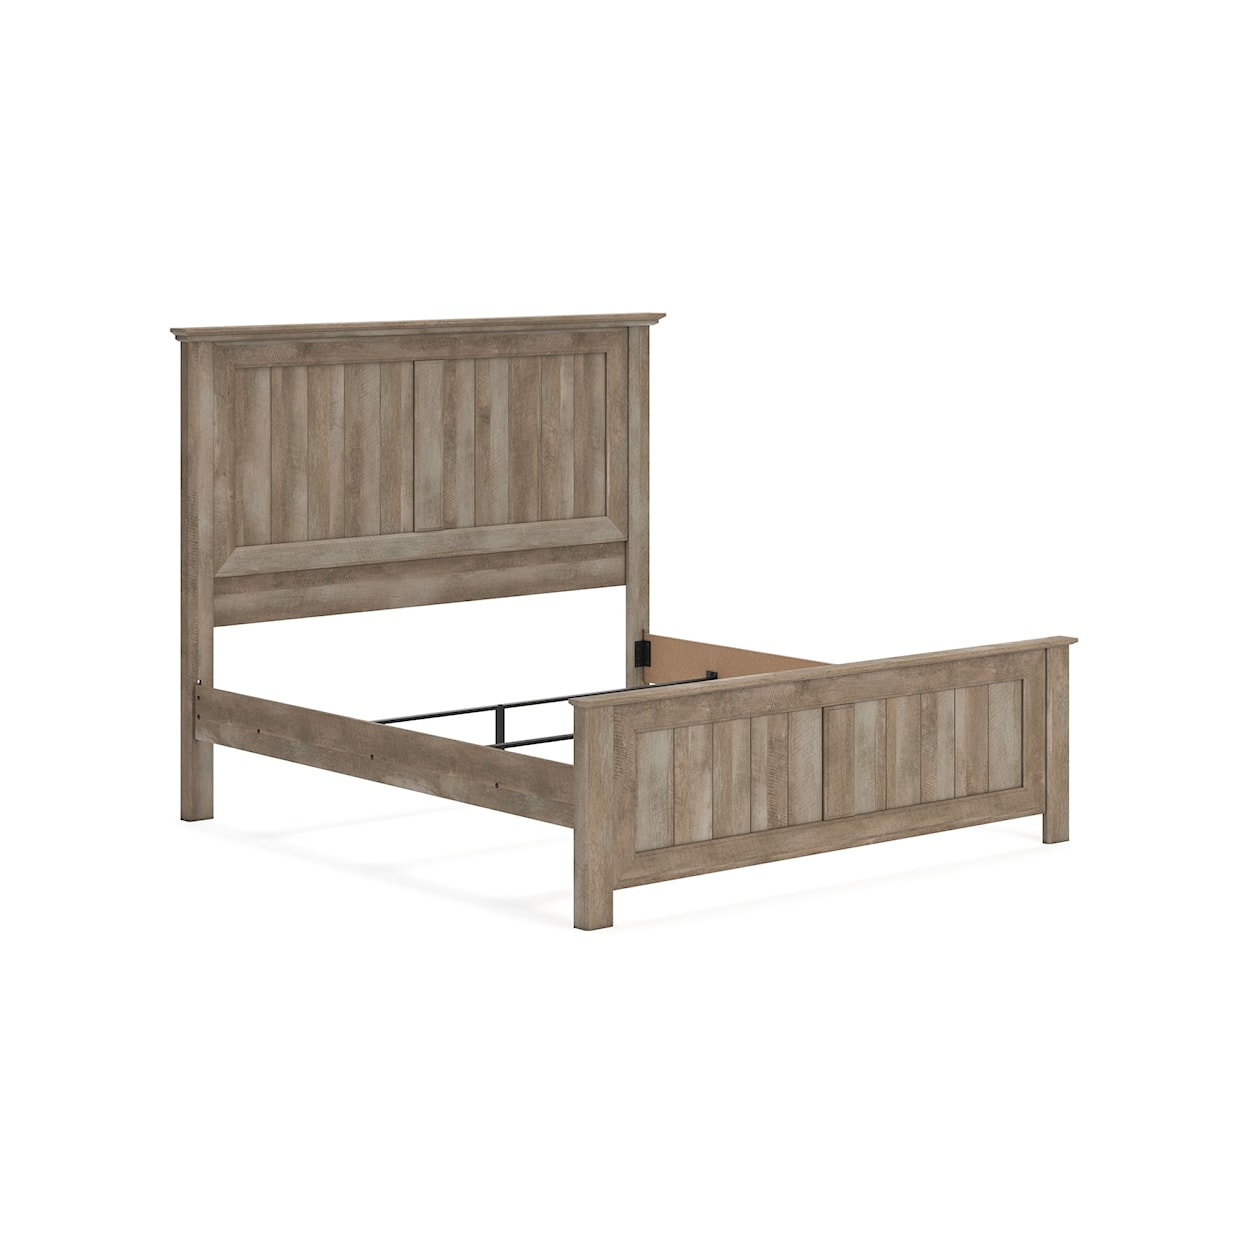 Benchcraft Yarbeck King Panel Bed